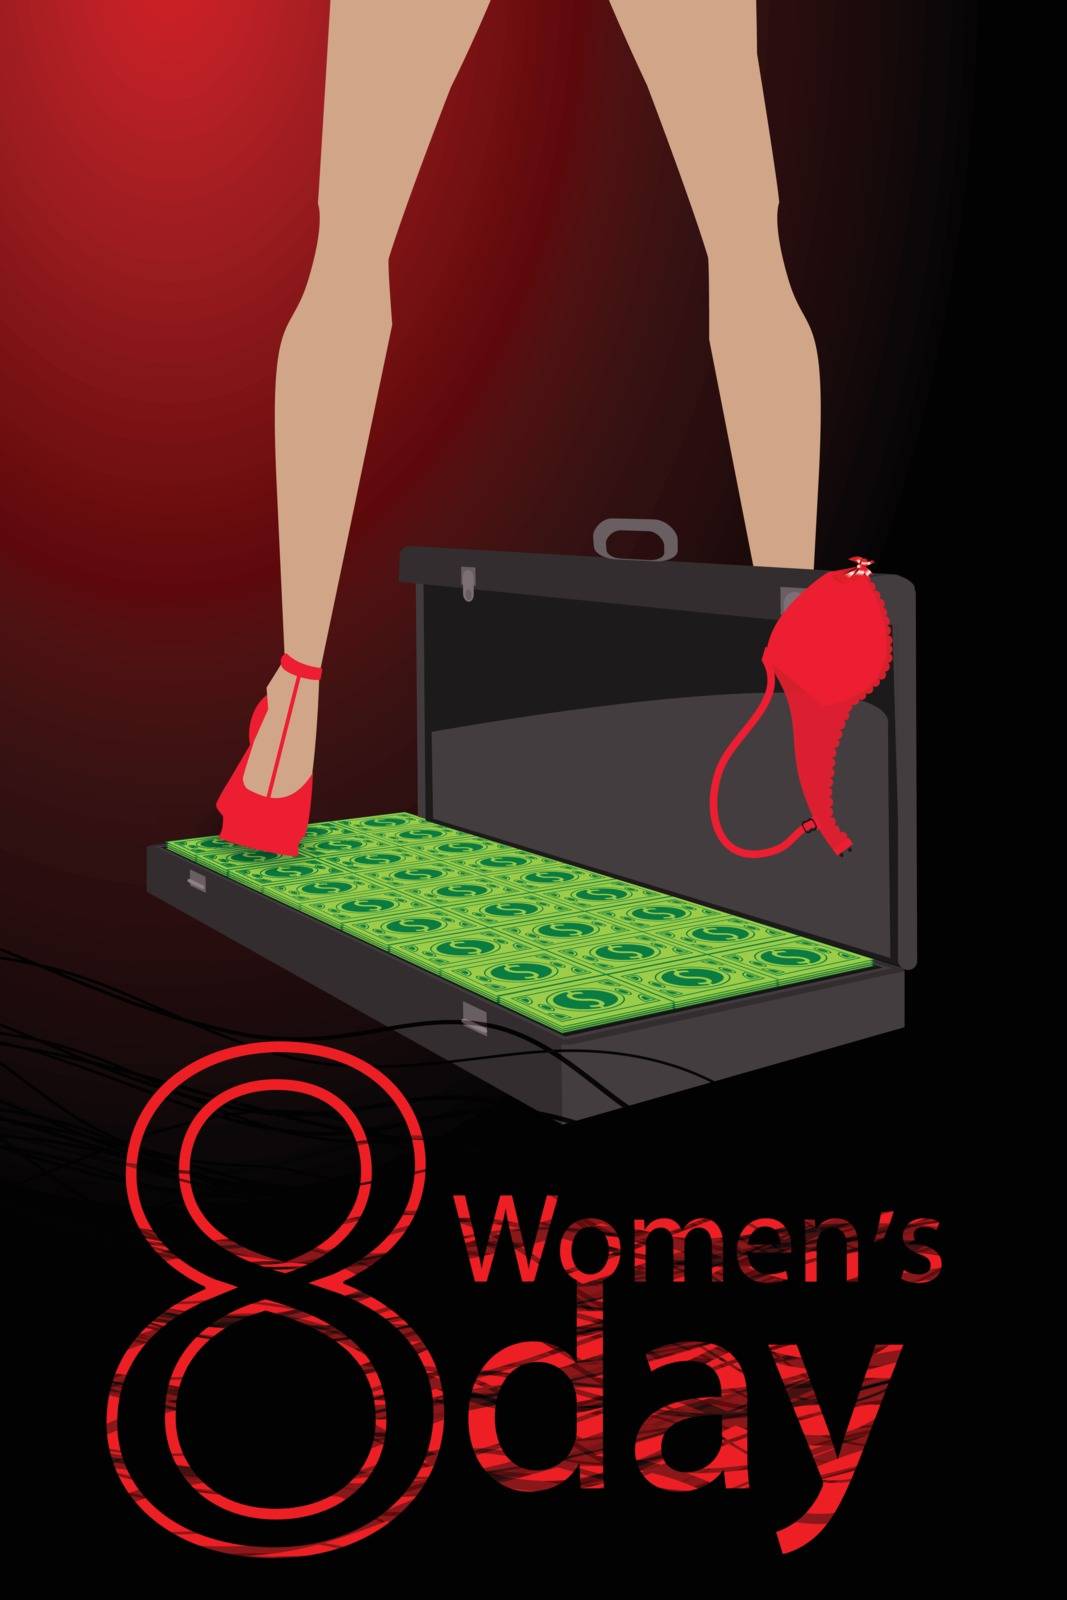 women s Day. feet in the case with money dollars. use a smart phone, website, printing, decorating etc ..